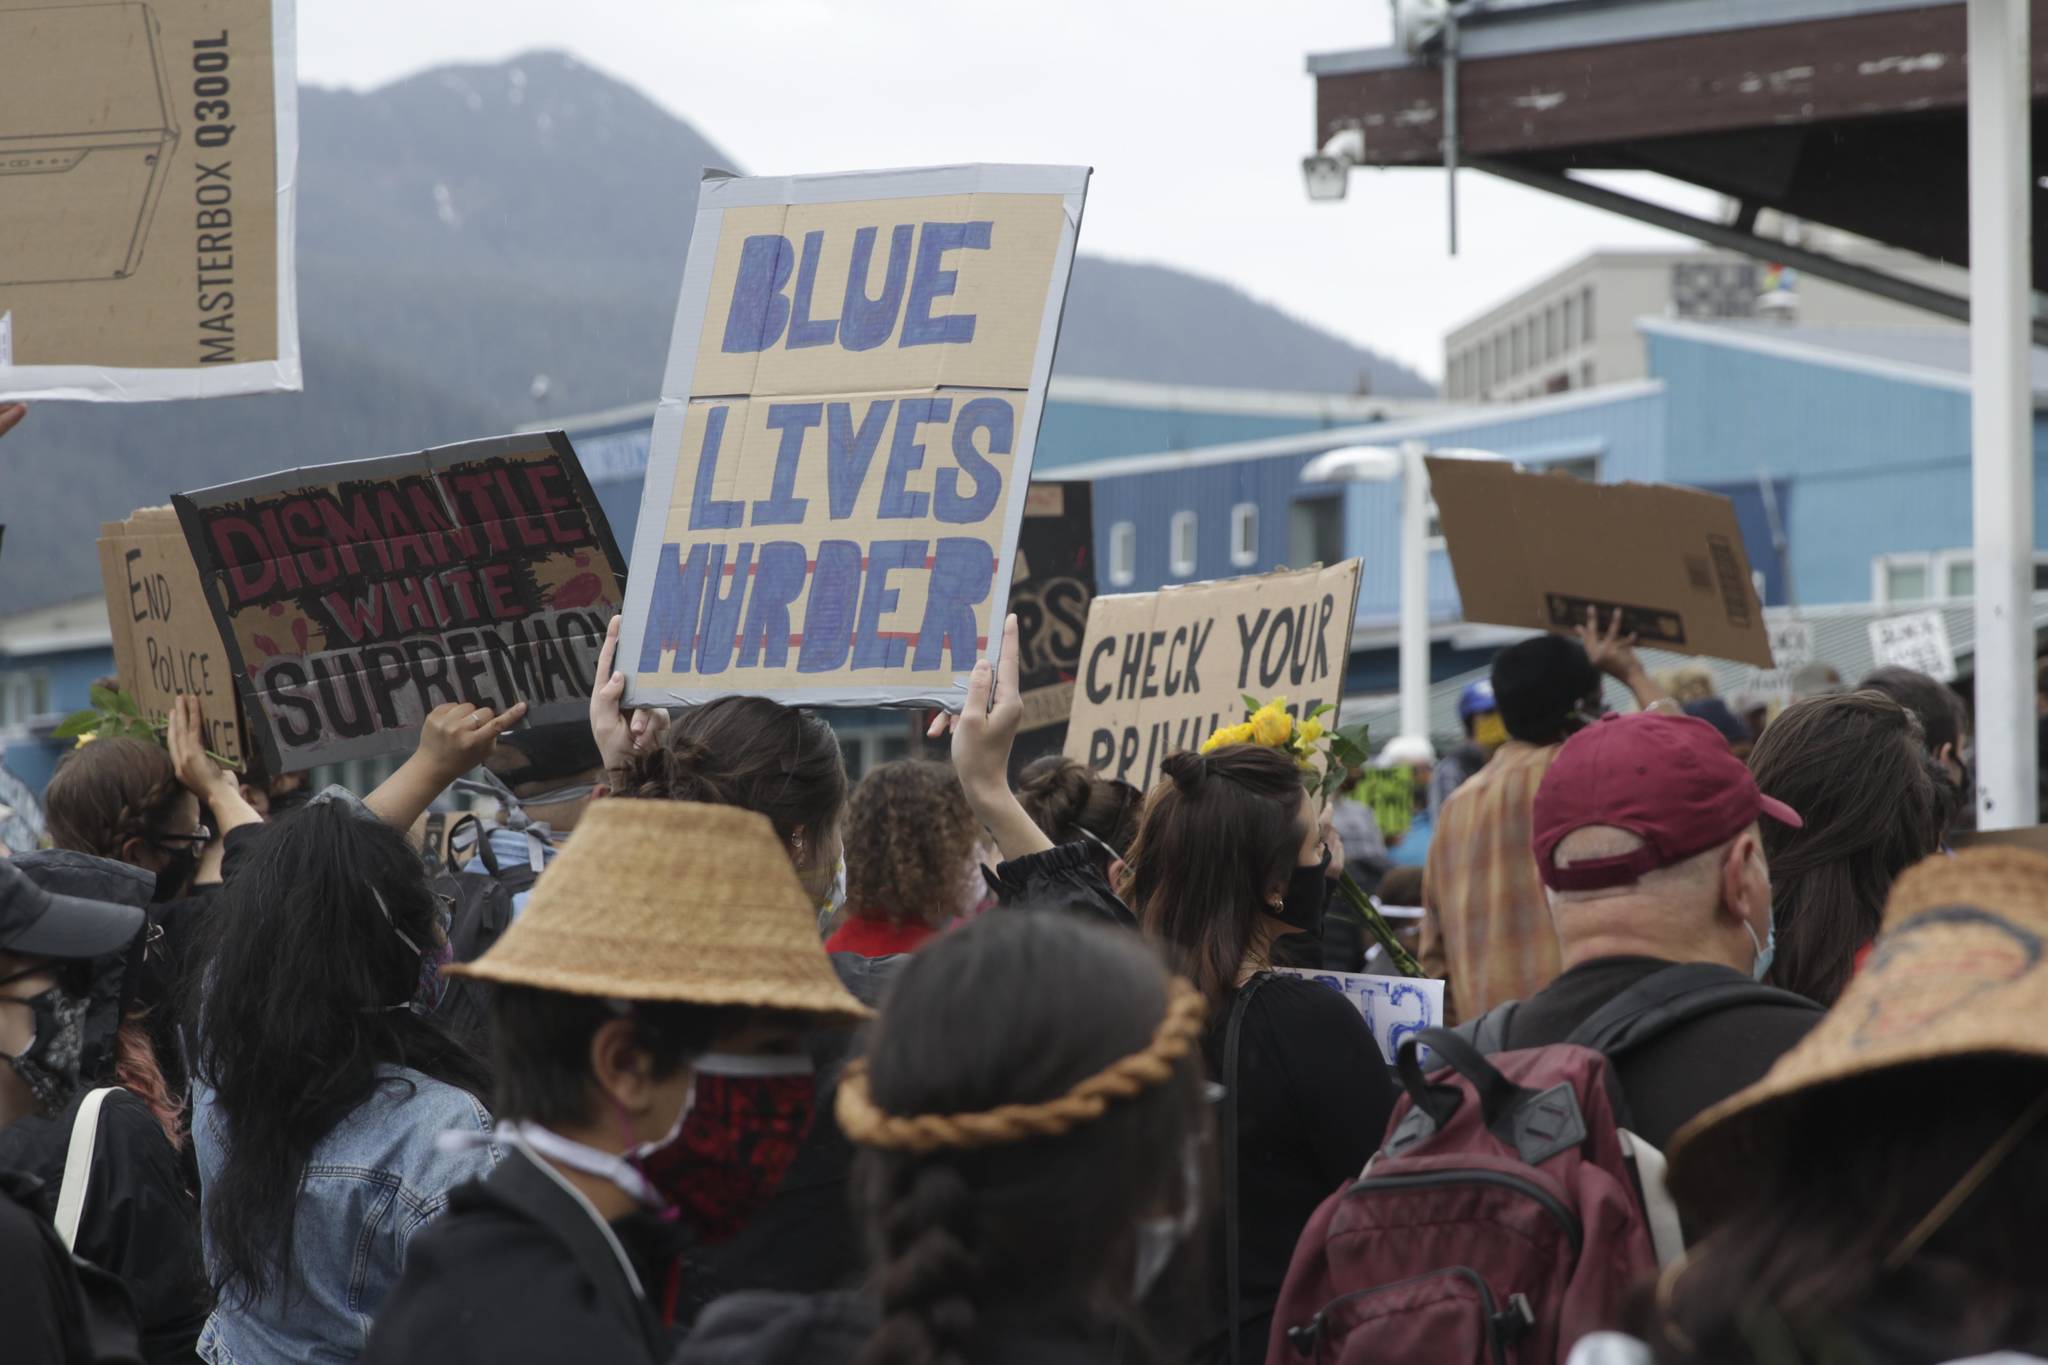 Juneau residents held a rally for human rights and the sanctity of black lives in Marine Park on June 6, 2020, following the death of George Floyd in the custody of the Minneapolis Police Department. (Michael S. Lockett | Juneau Empire)